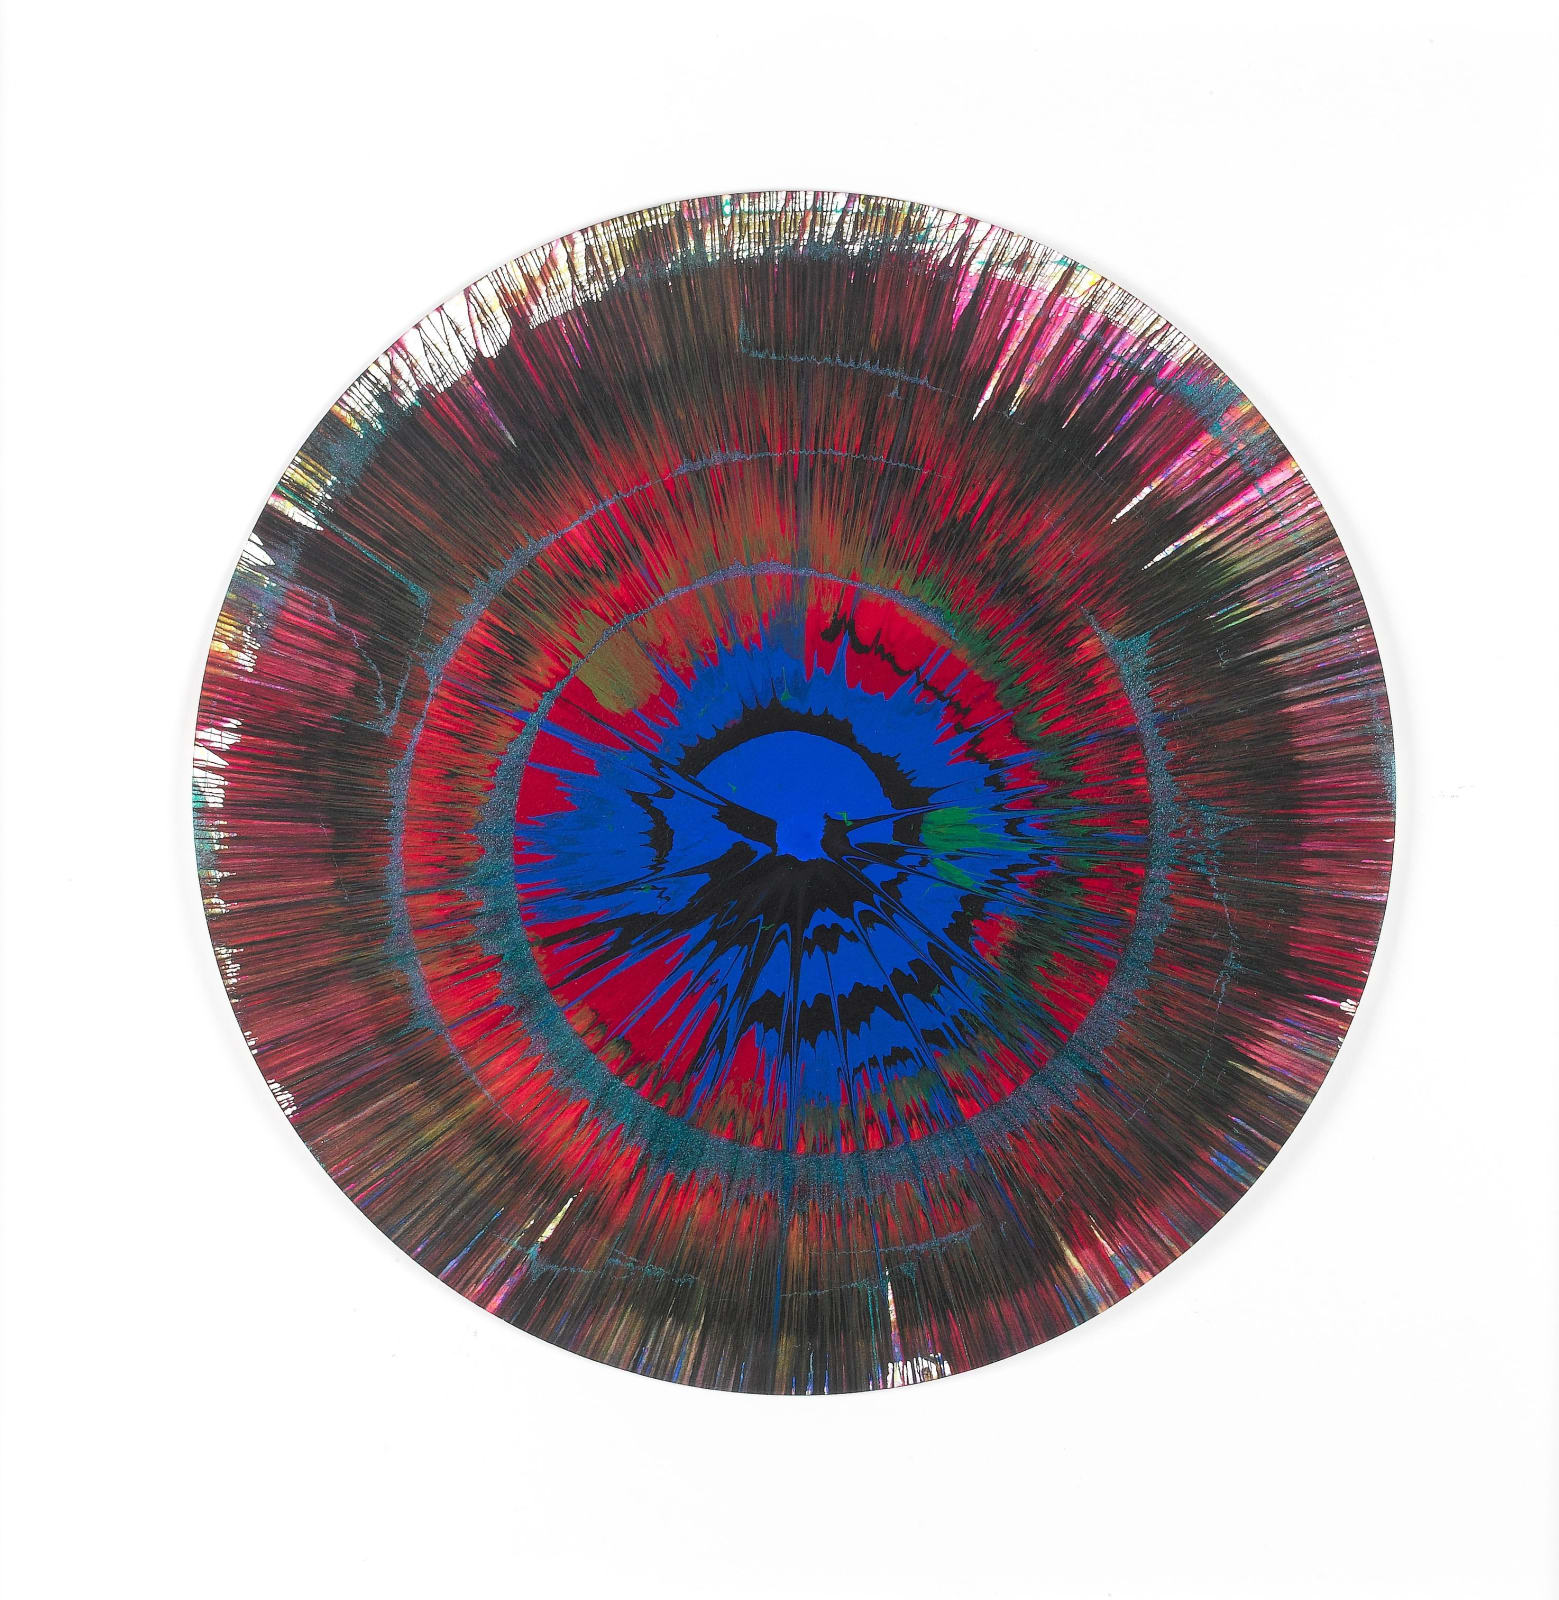 Damien Hirst, Spin Painting,, 2005 | Omer Tiroche Gallery